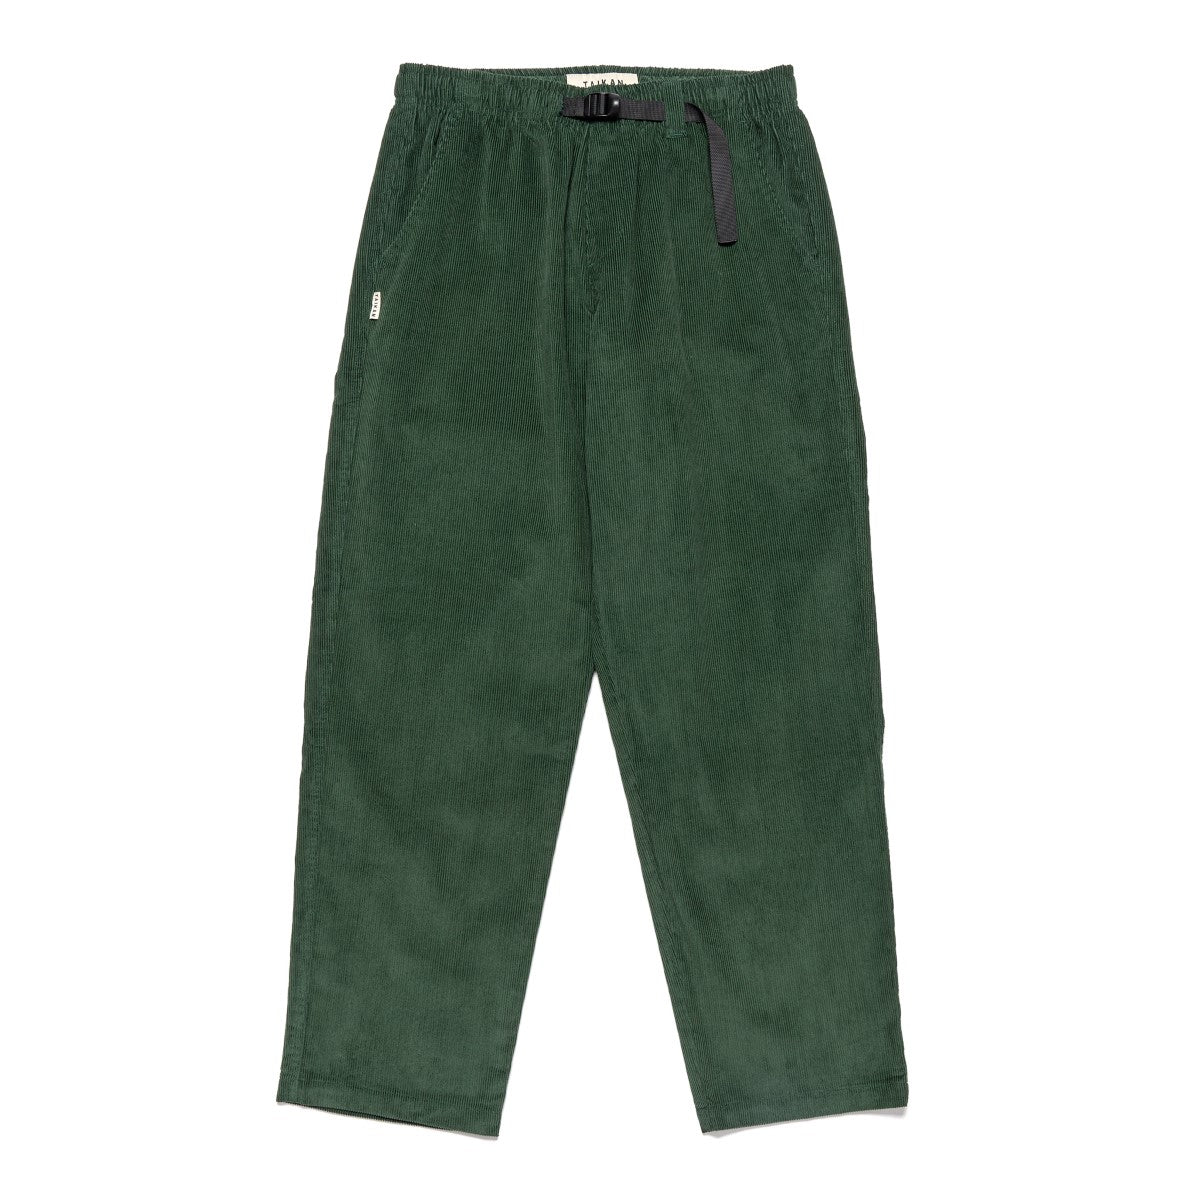 CHILLER PANT-FOREST GREEN CORDUROY-